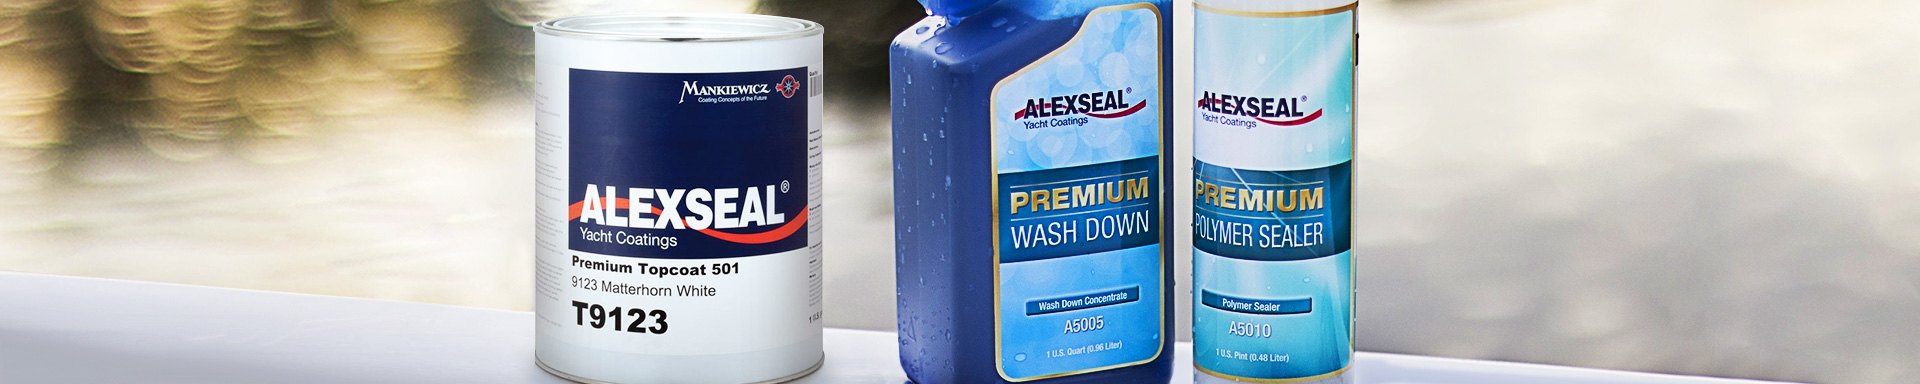 Alexseal Cleaners & Chemicals